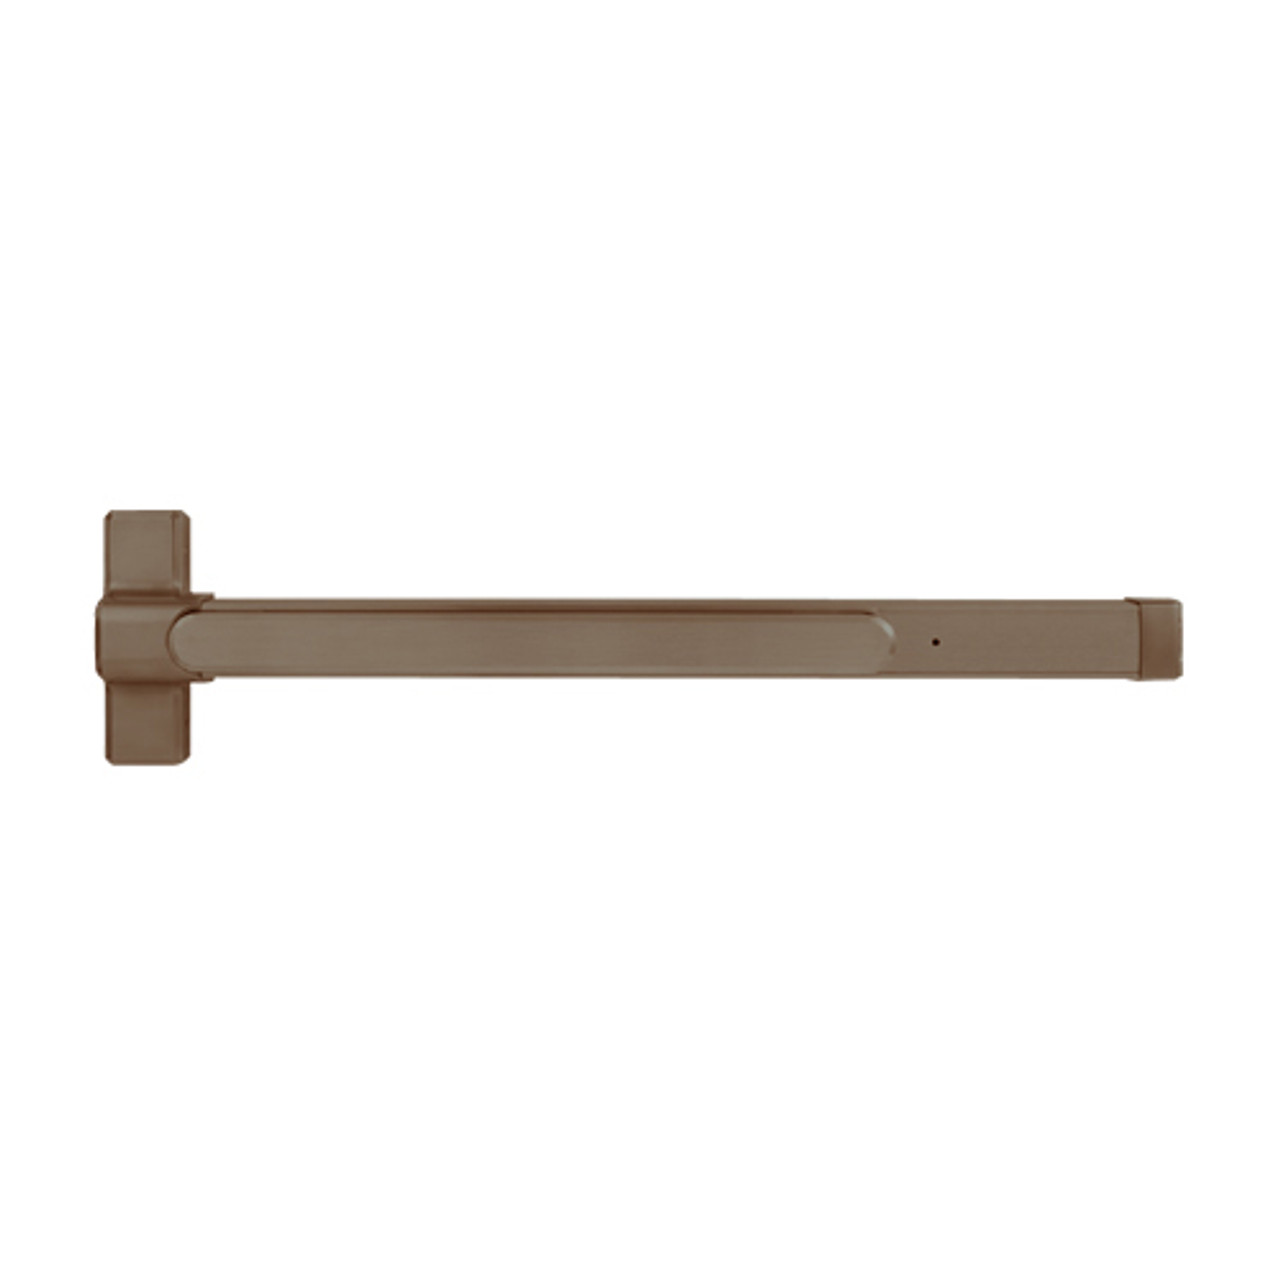 QED129X-36-8-313AN Stanley QED100 Series Heavy Duty Concealed Vertical Rod Fire Rated Exit Device in Anodized Duranodic Bronze Finish